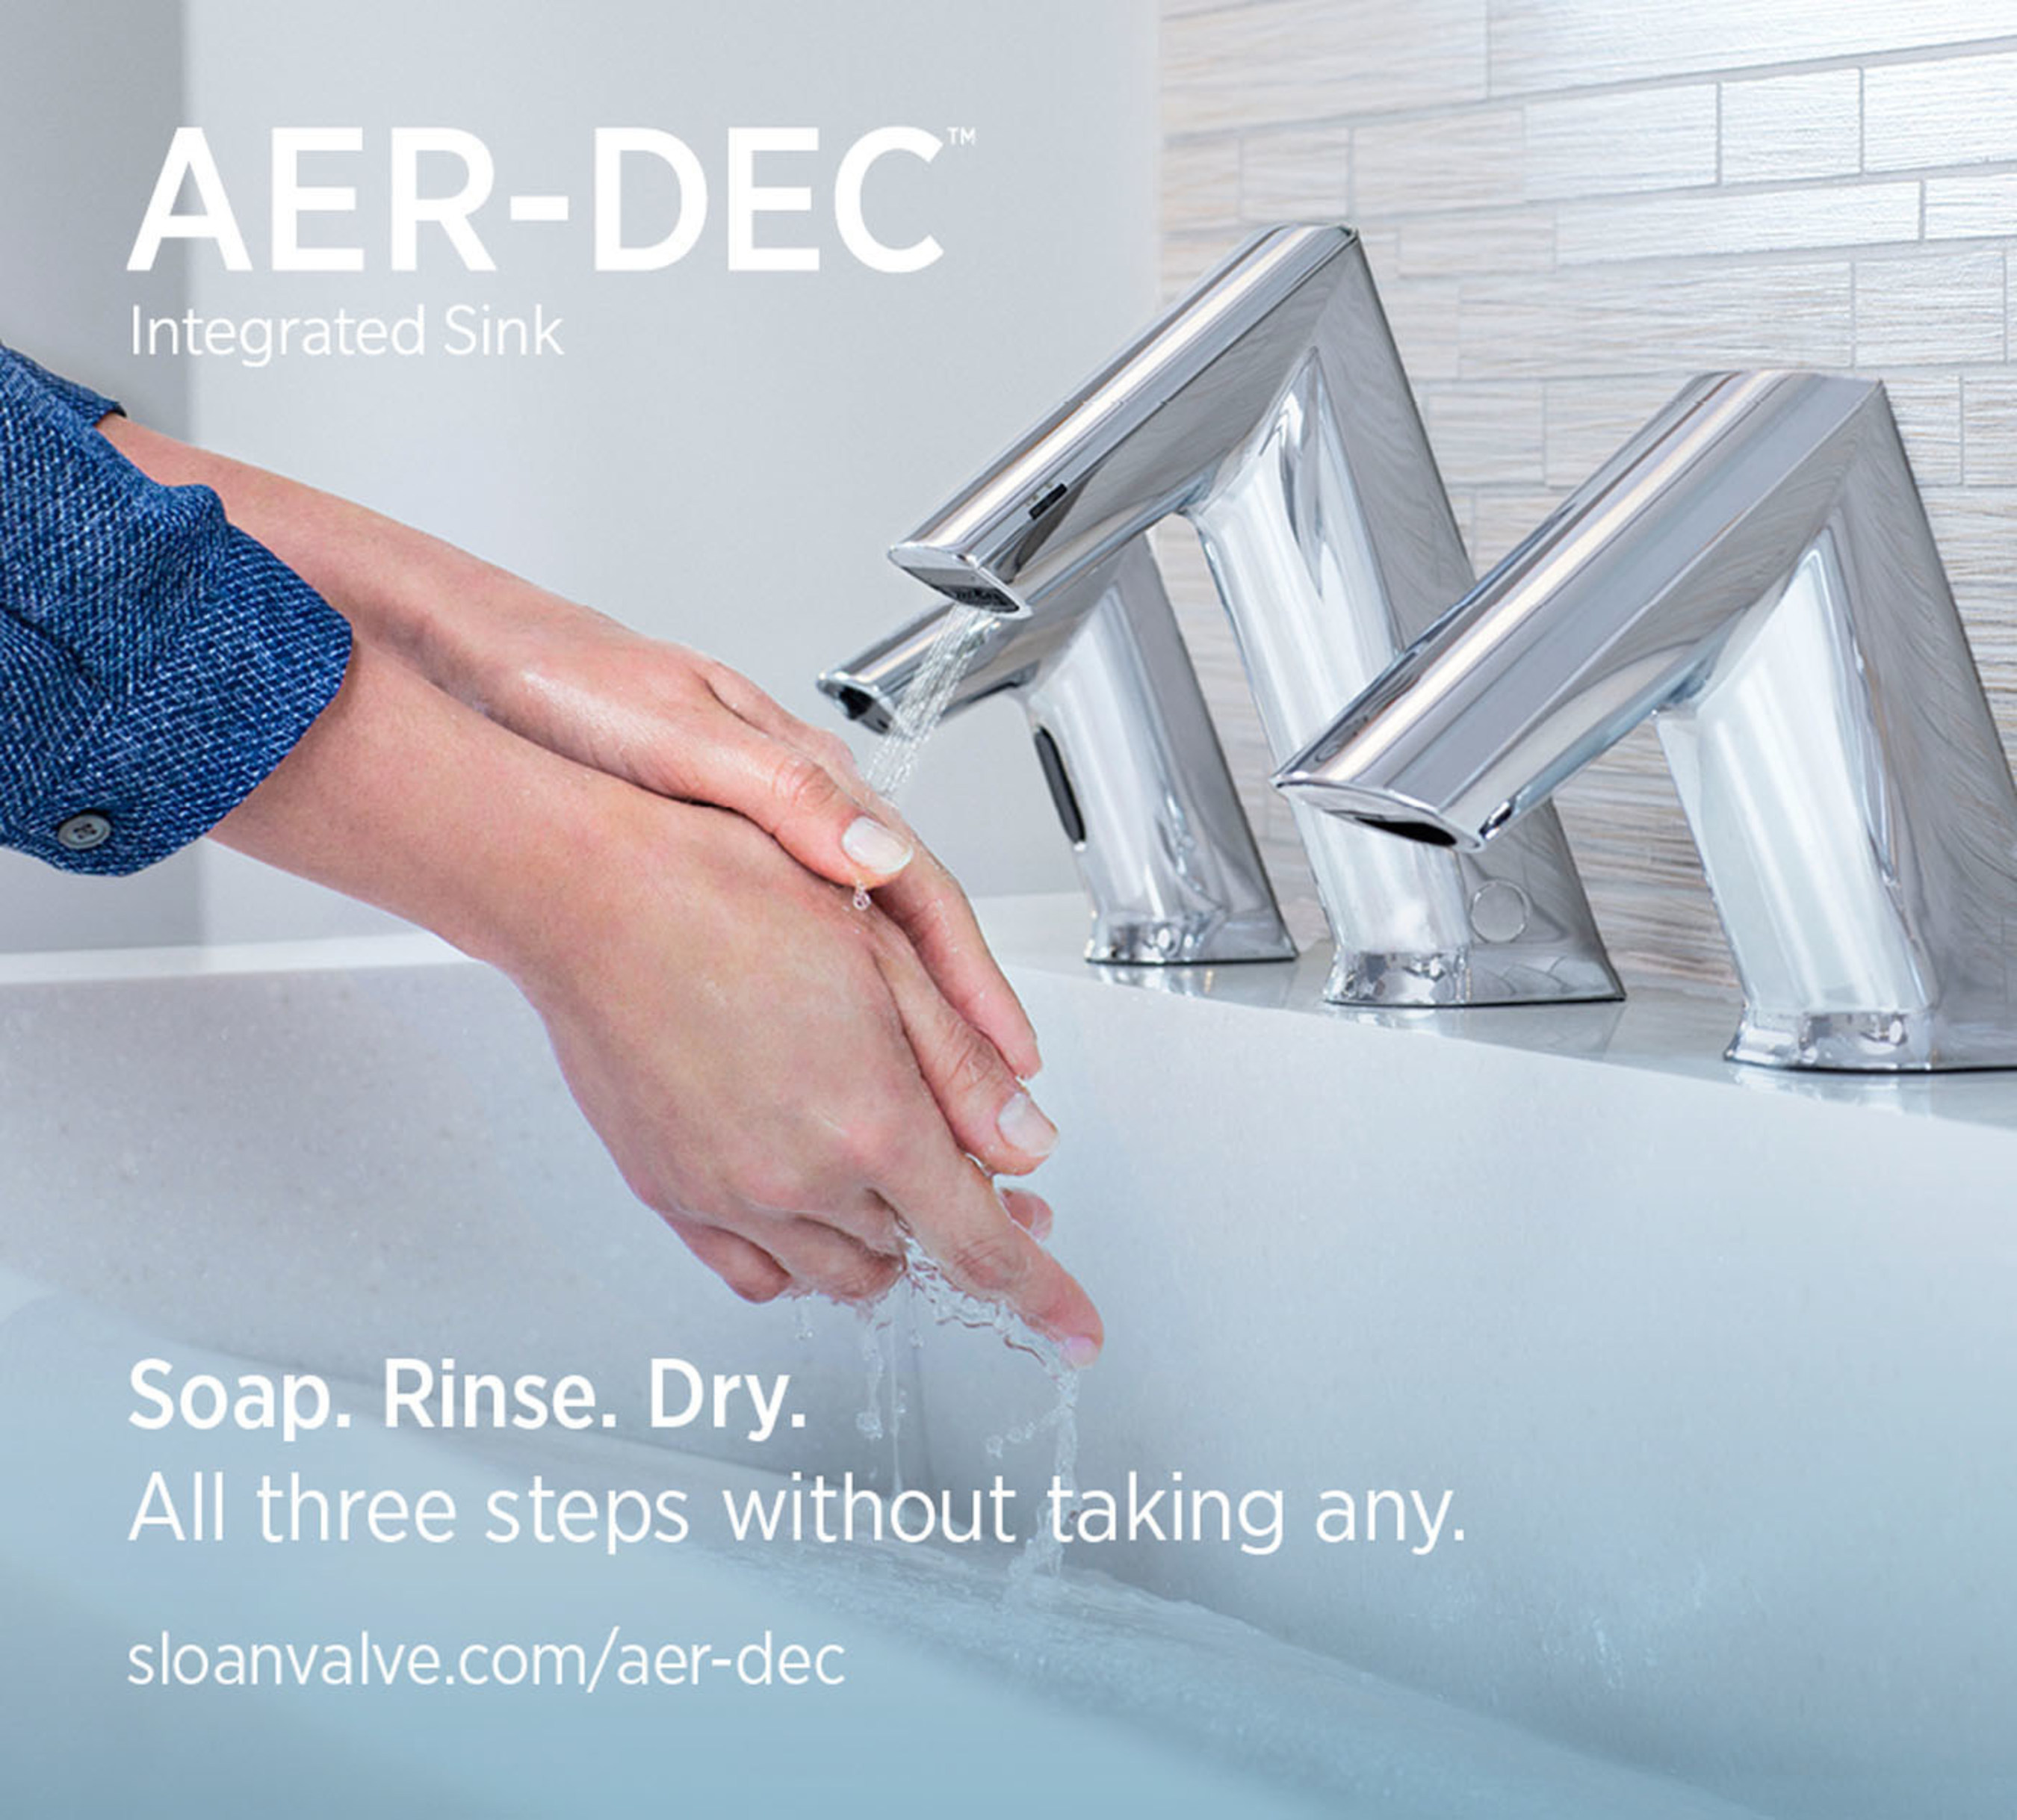 Soap. Rinse. Dry. All three steps without taking any.  Step up to the future of sustainable restroom design - the AER-DEC(TM) Integrated Sink. The AER-DEC is the perfect innovation for any high-end washroom. Soap dispenser, faucet, hand dryer, and sink basin all designed to work together as one beautiful, touch-free, hygienic, highly efficient system.